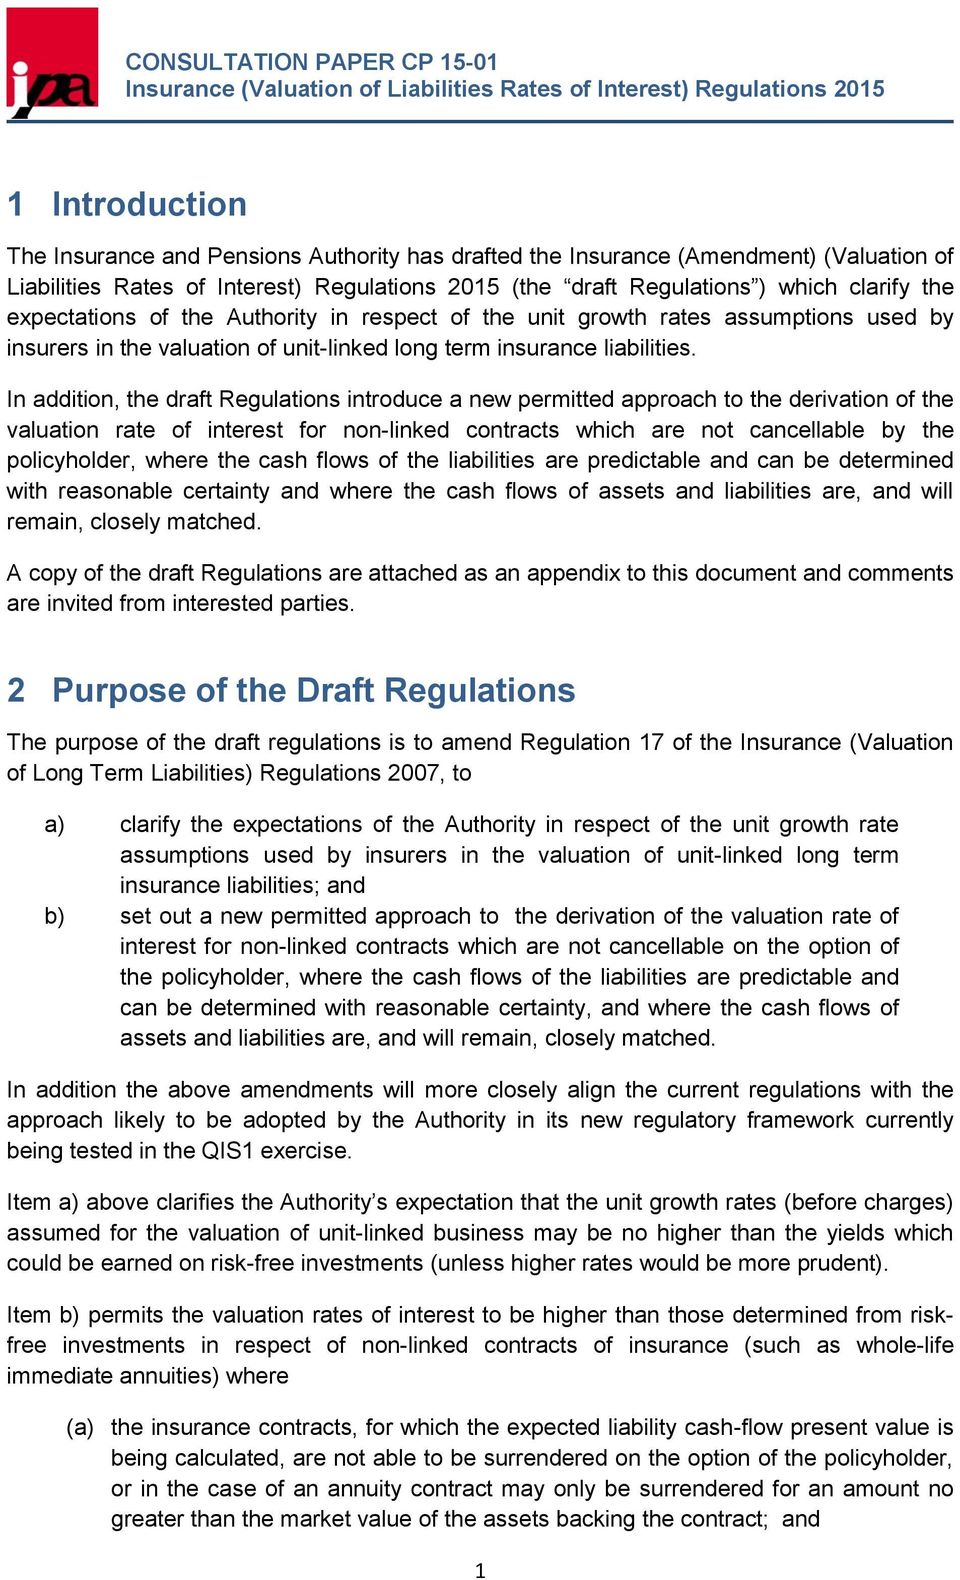 In addition, the draft Regulations introduce a new permitted approach to the derivation of the valuation rate of interest for non-linked contracts which are not cancellable by the policyholder, where